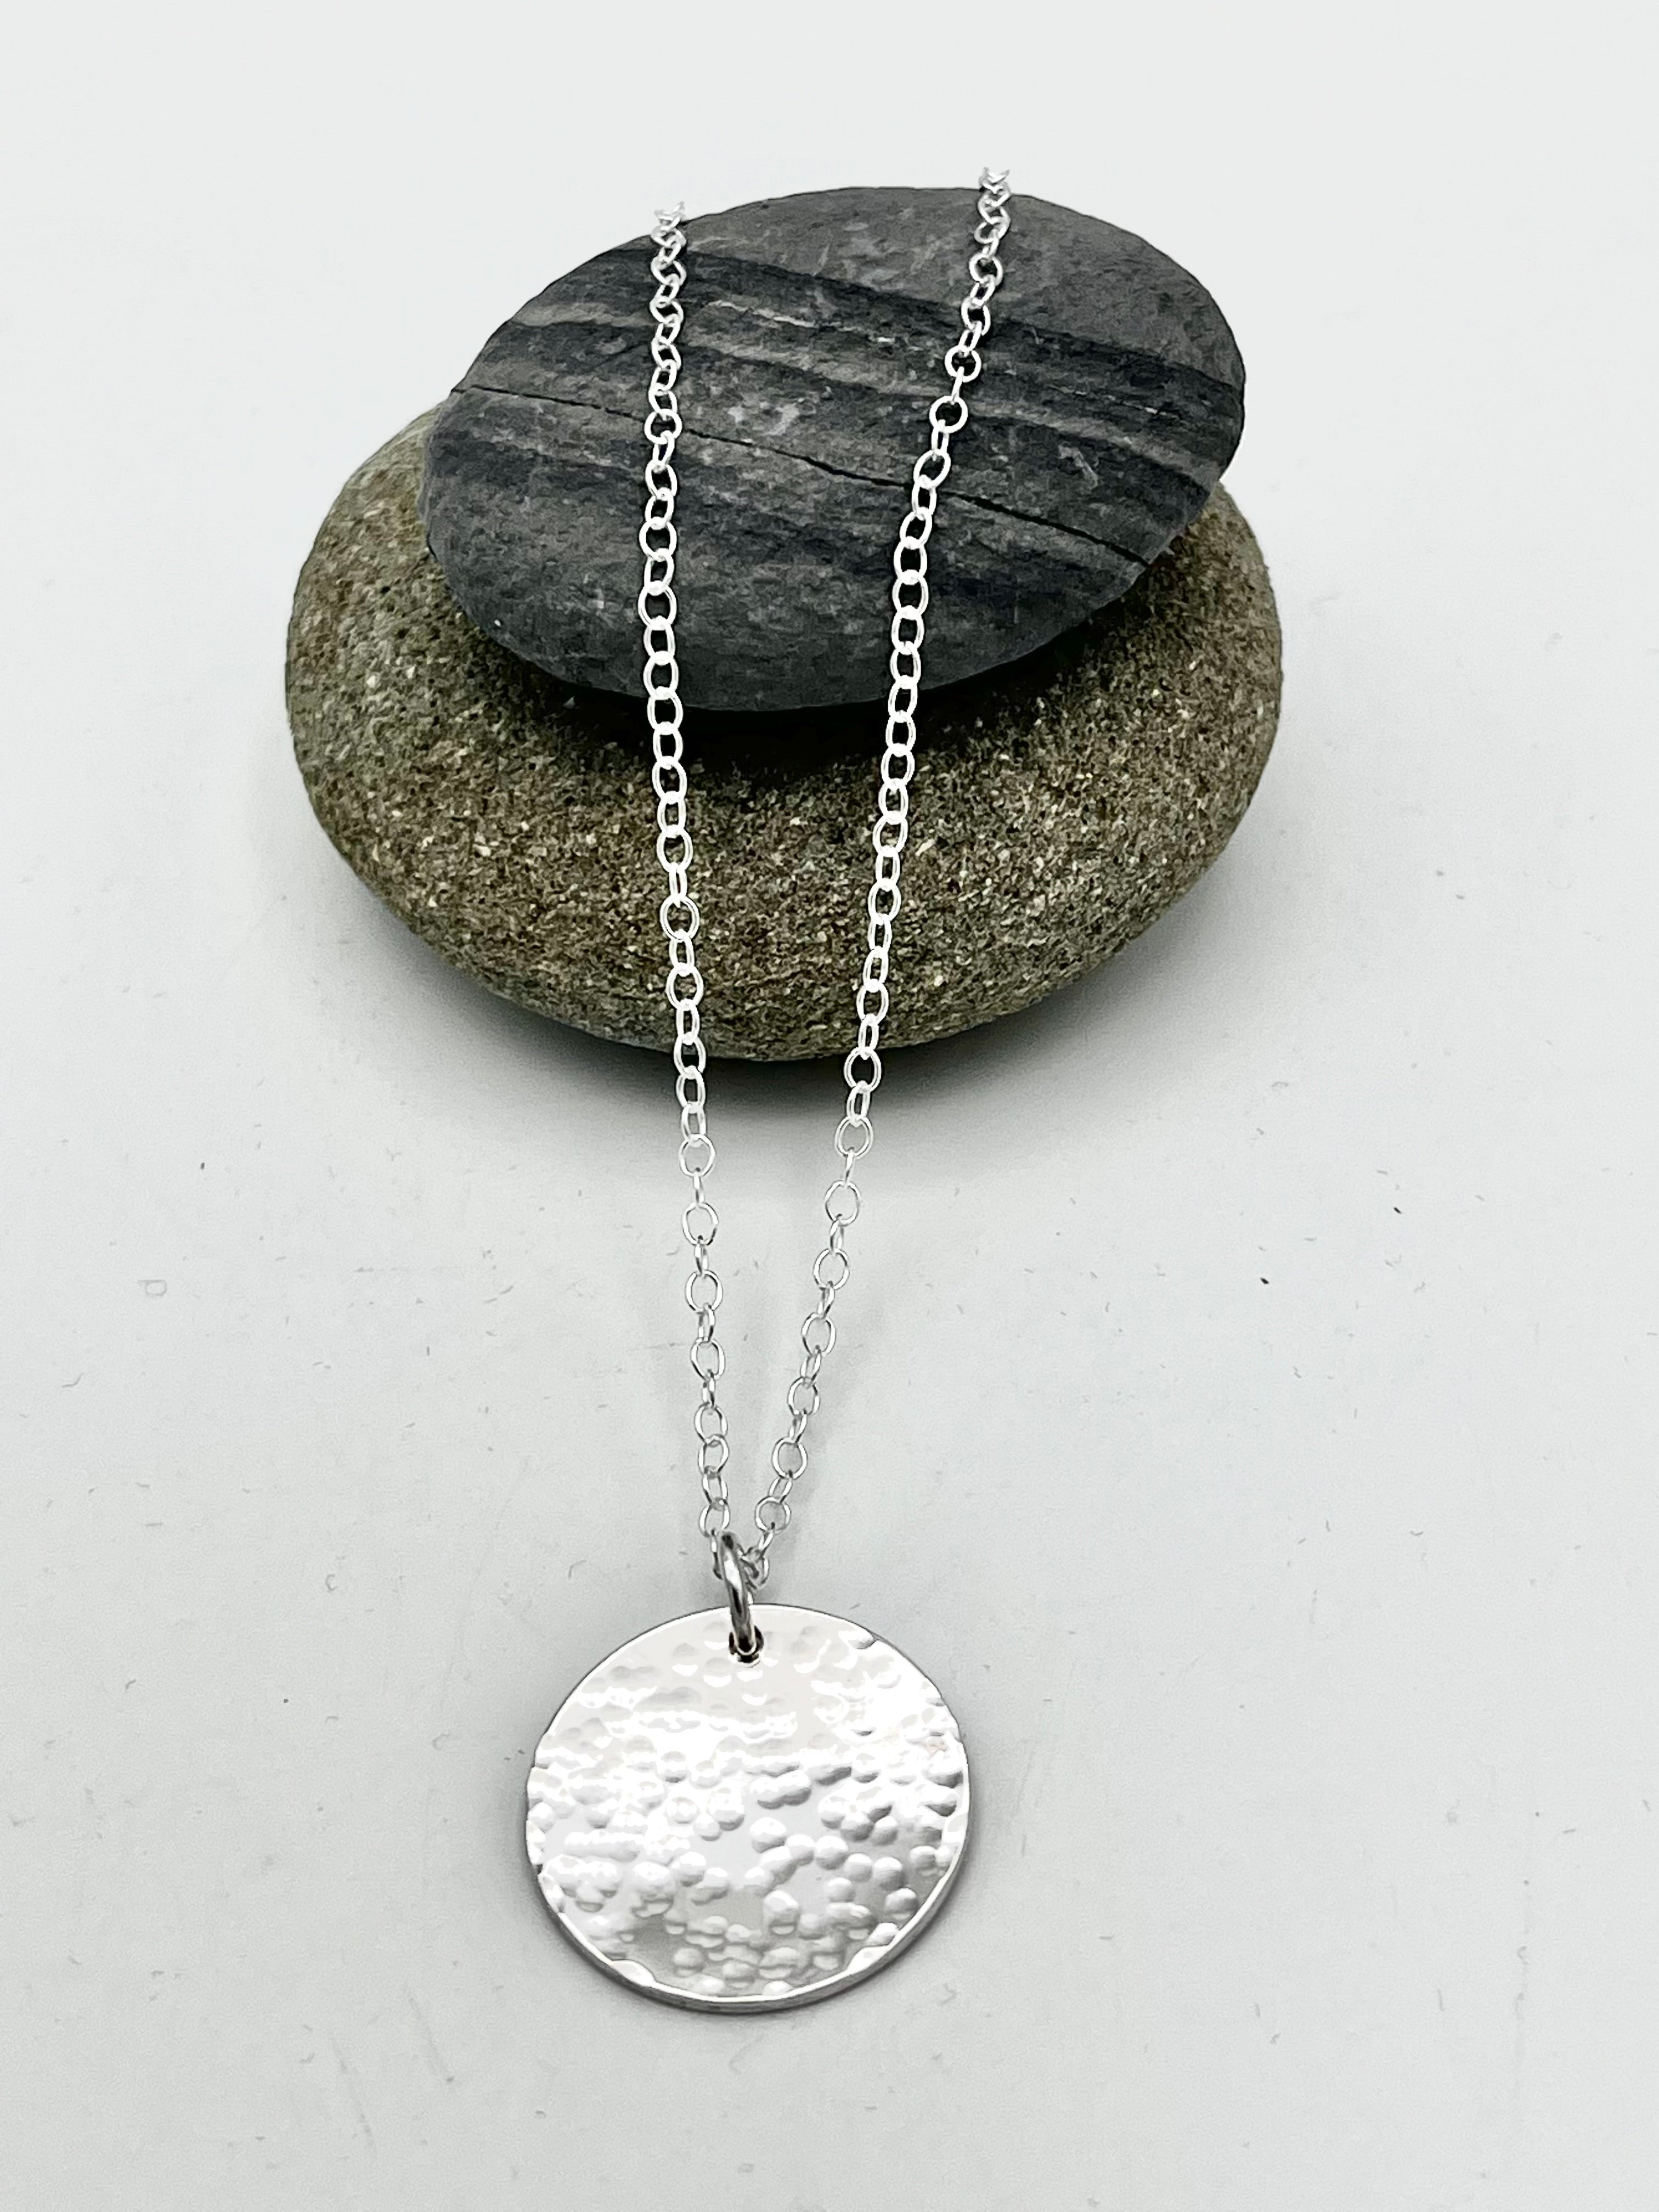 Round disc pendant 15mm diameter hammered finish on 16" chain